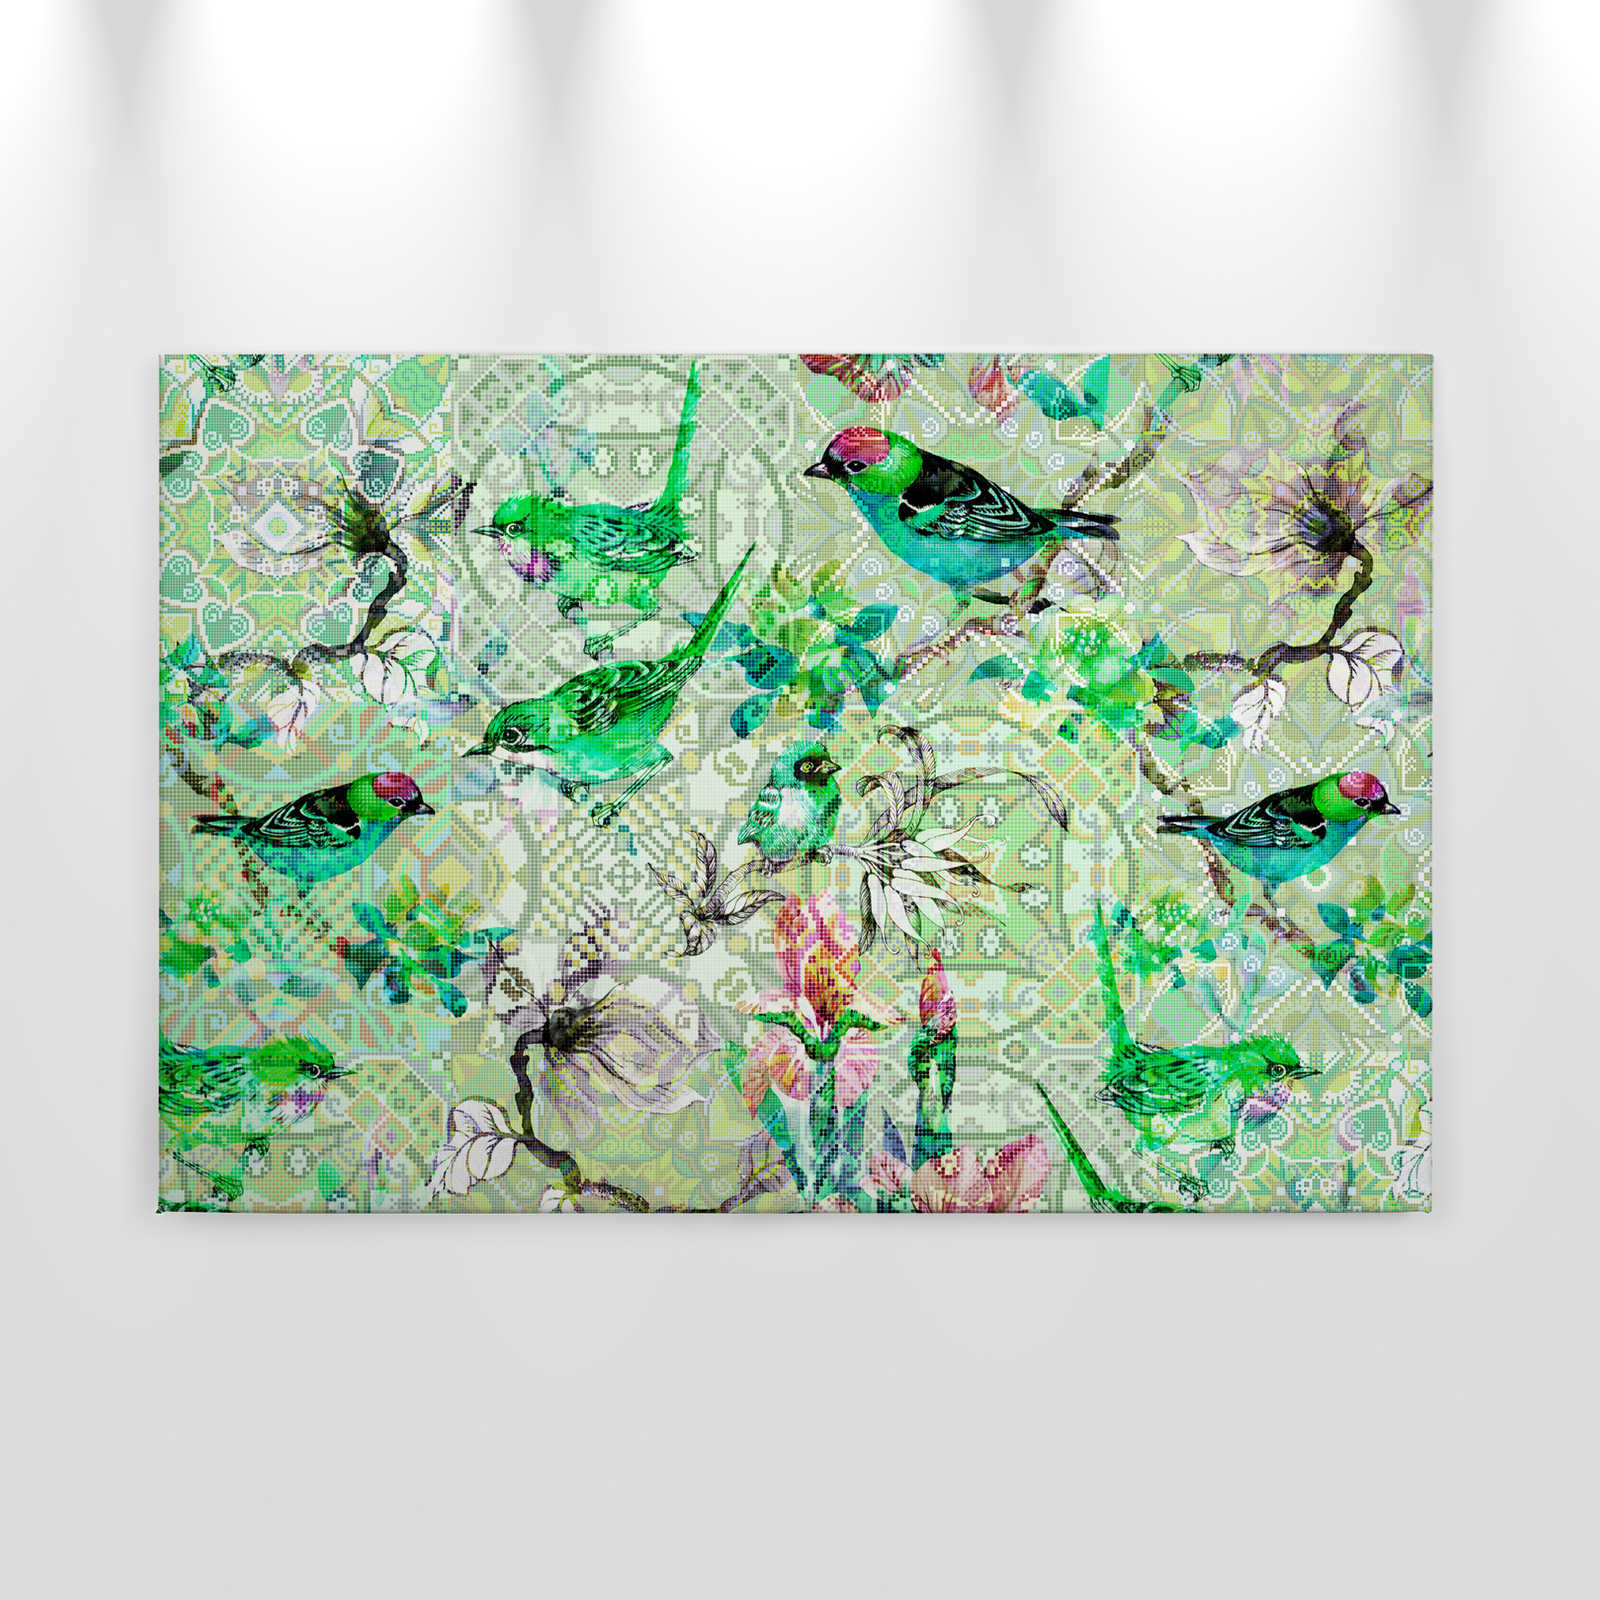             Bird Canvas Painting Green with Mosaic Pattern - 0.90 m x 0.60 m
        